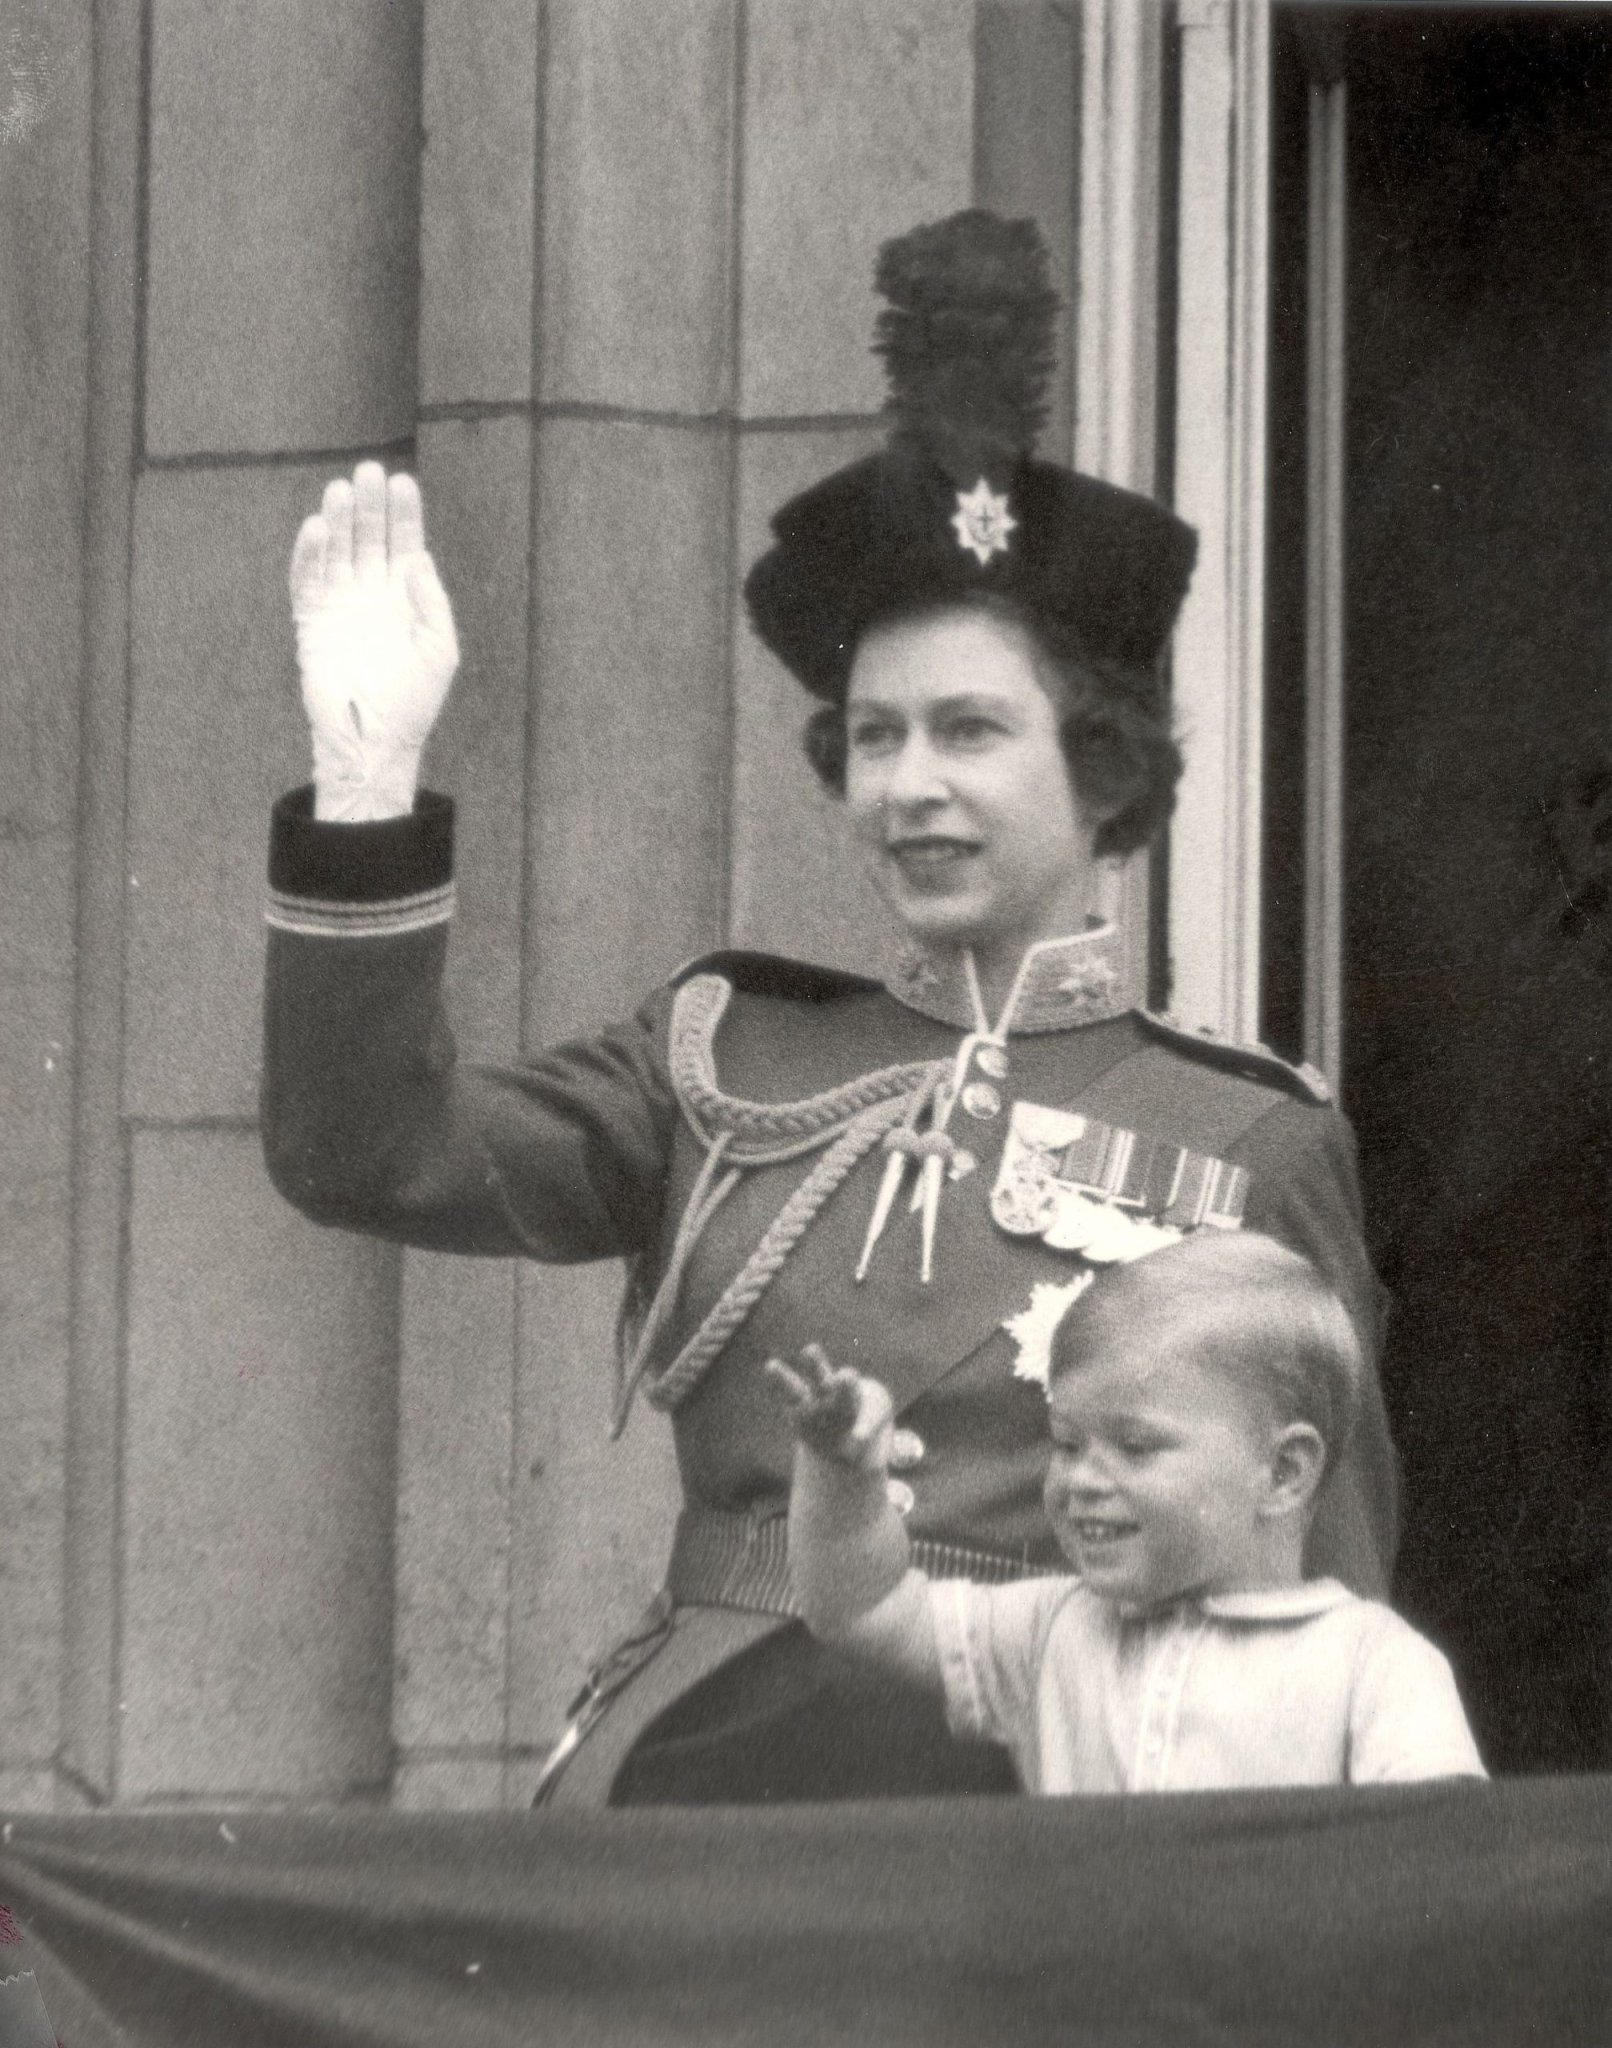 Trooping the Colour: 19 Vintage Photos of the Queen’s Annual Parade